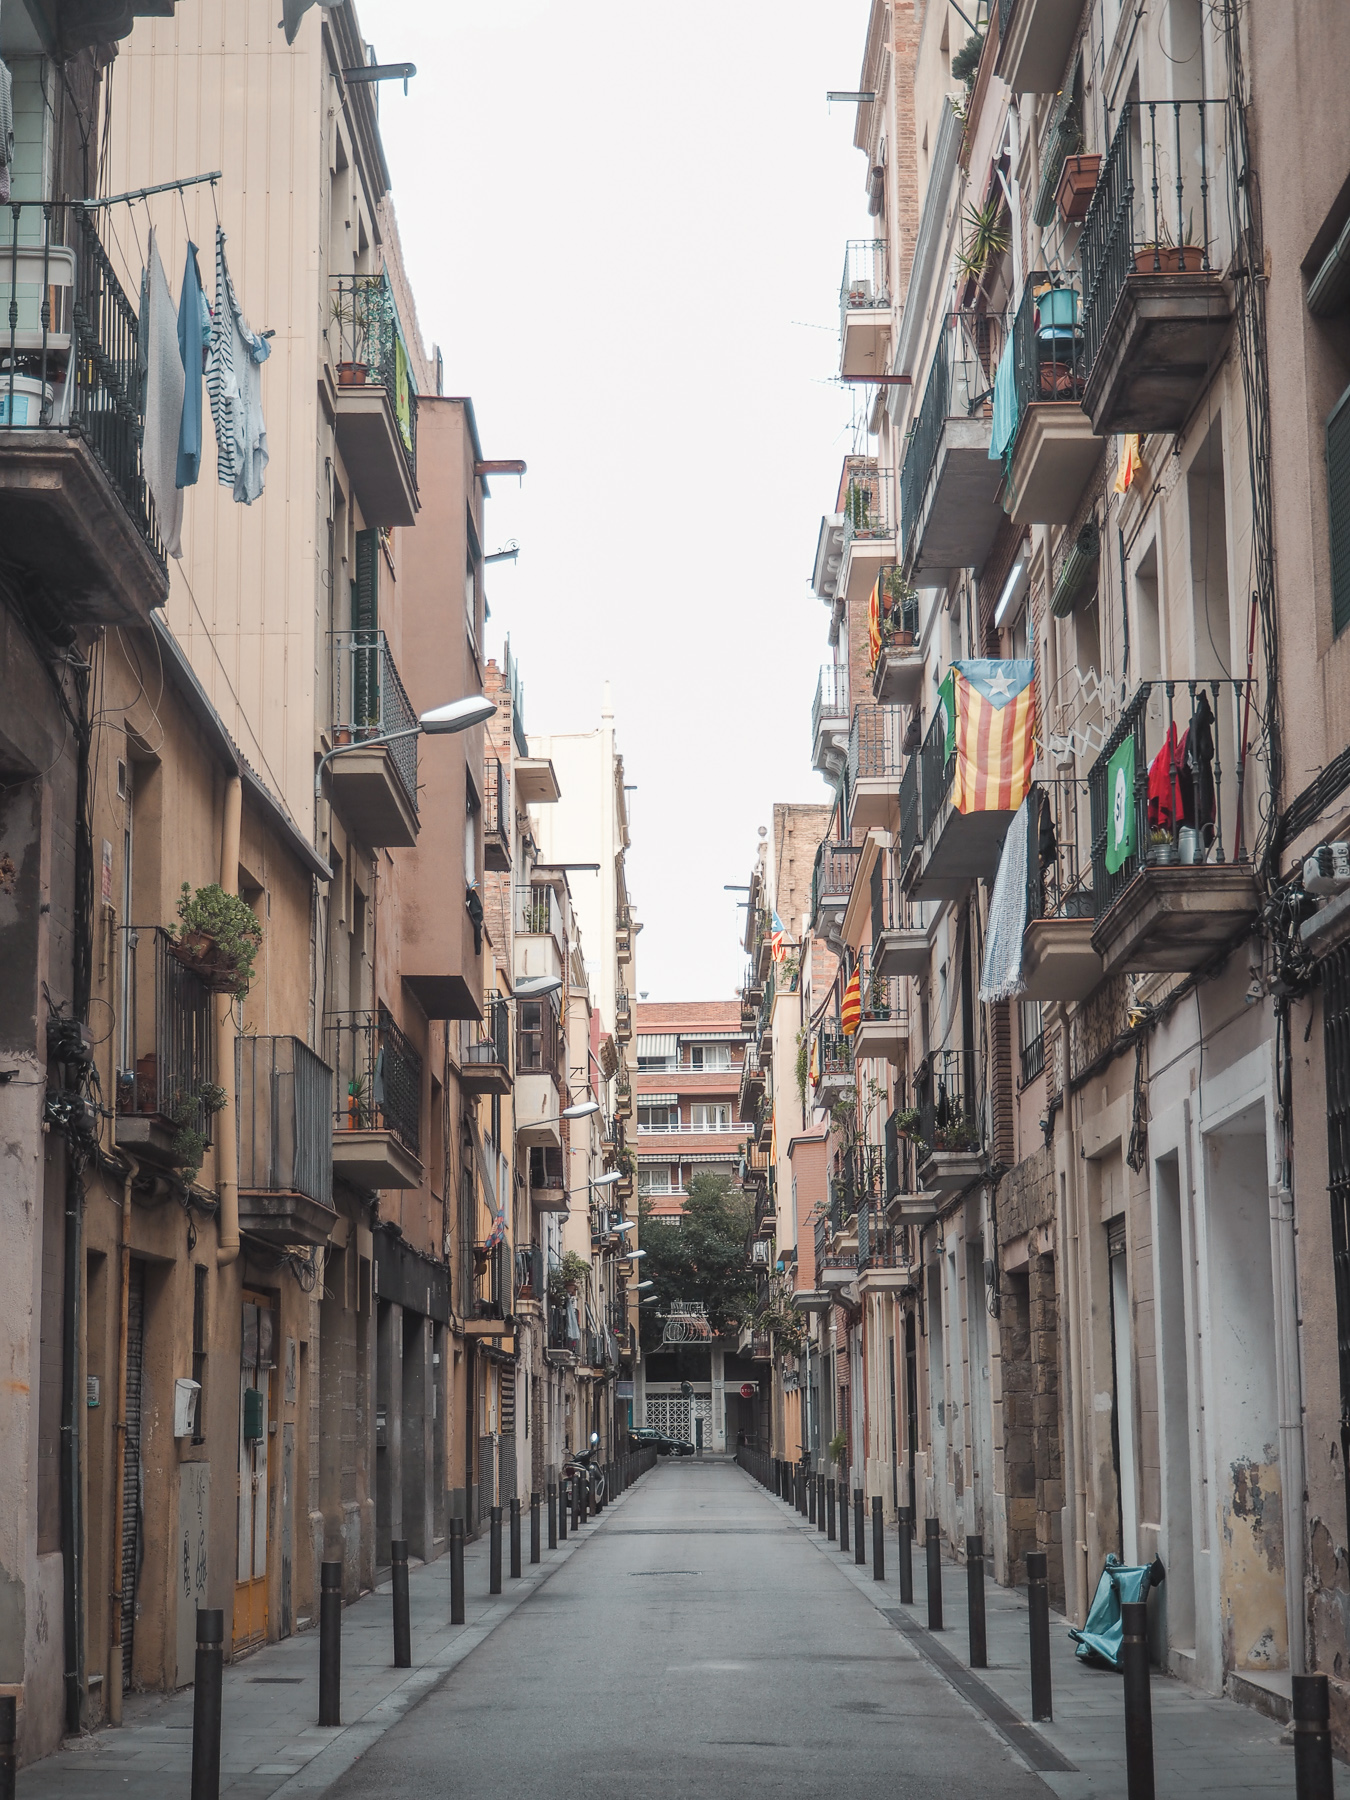 The Best Neighborhoods To Live In Barcelona For Young Professionals - www.lifestyletraveler.co | IG: @lifestyletraveler.co